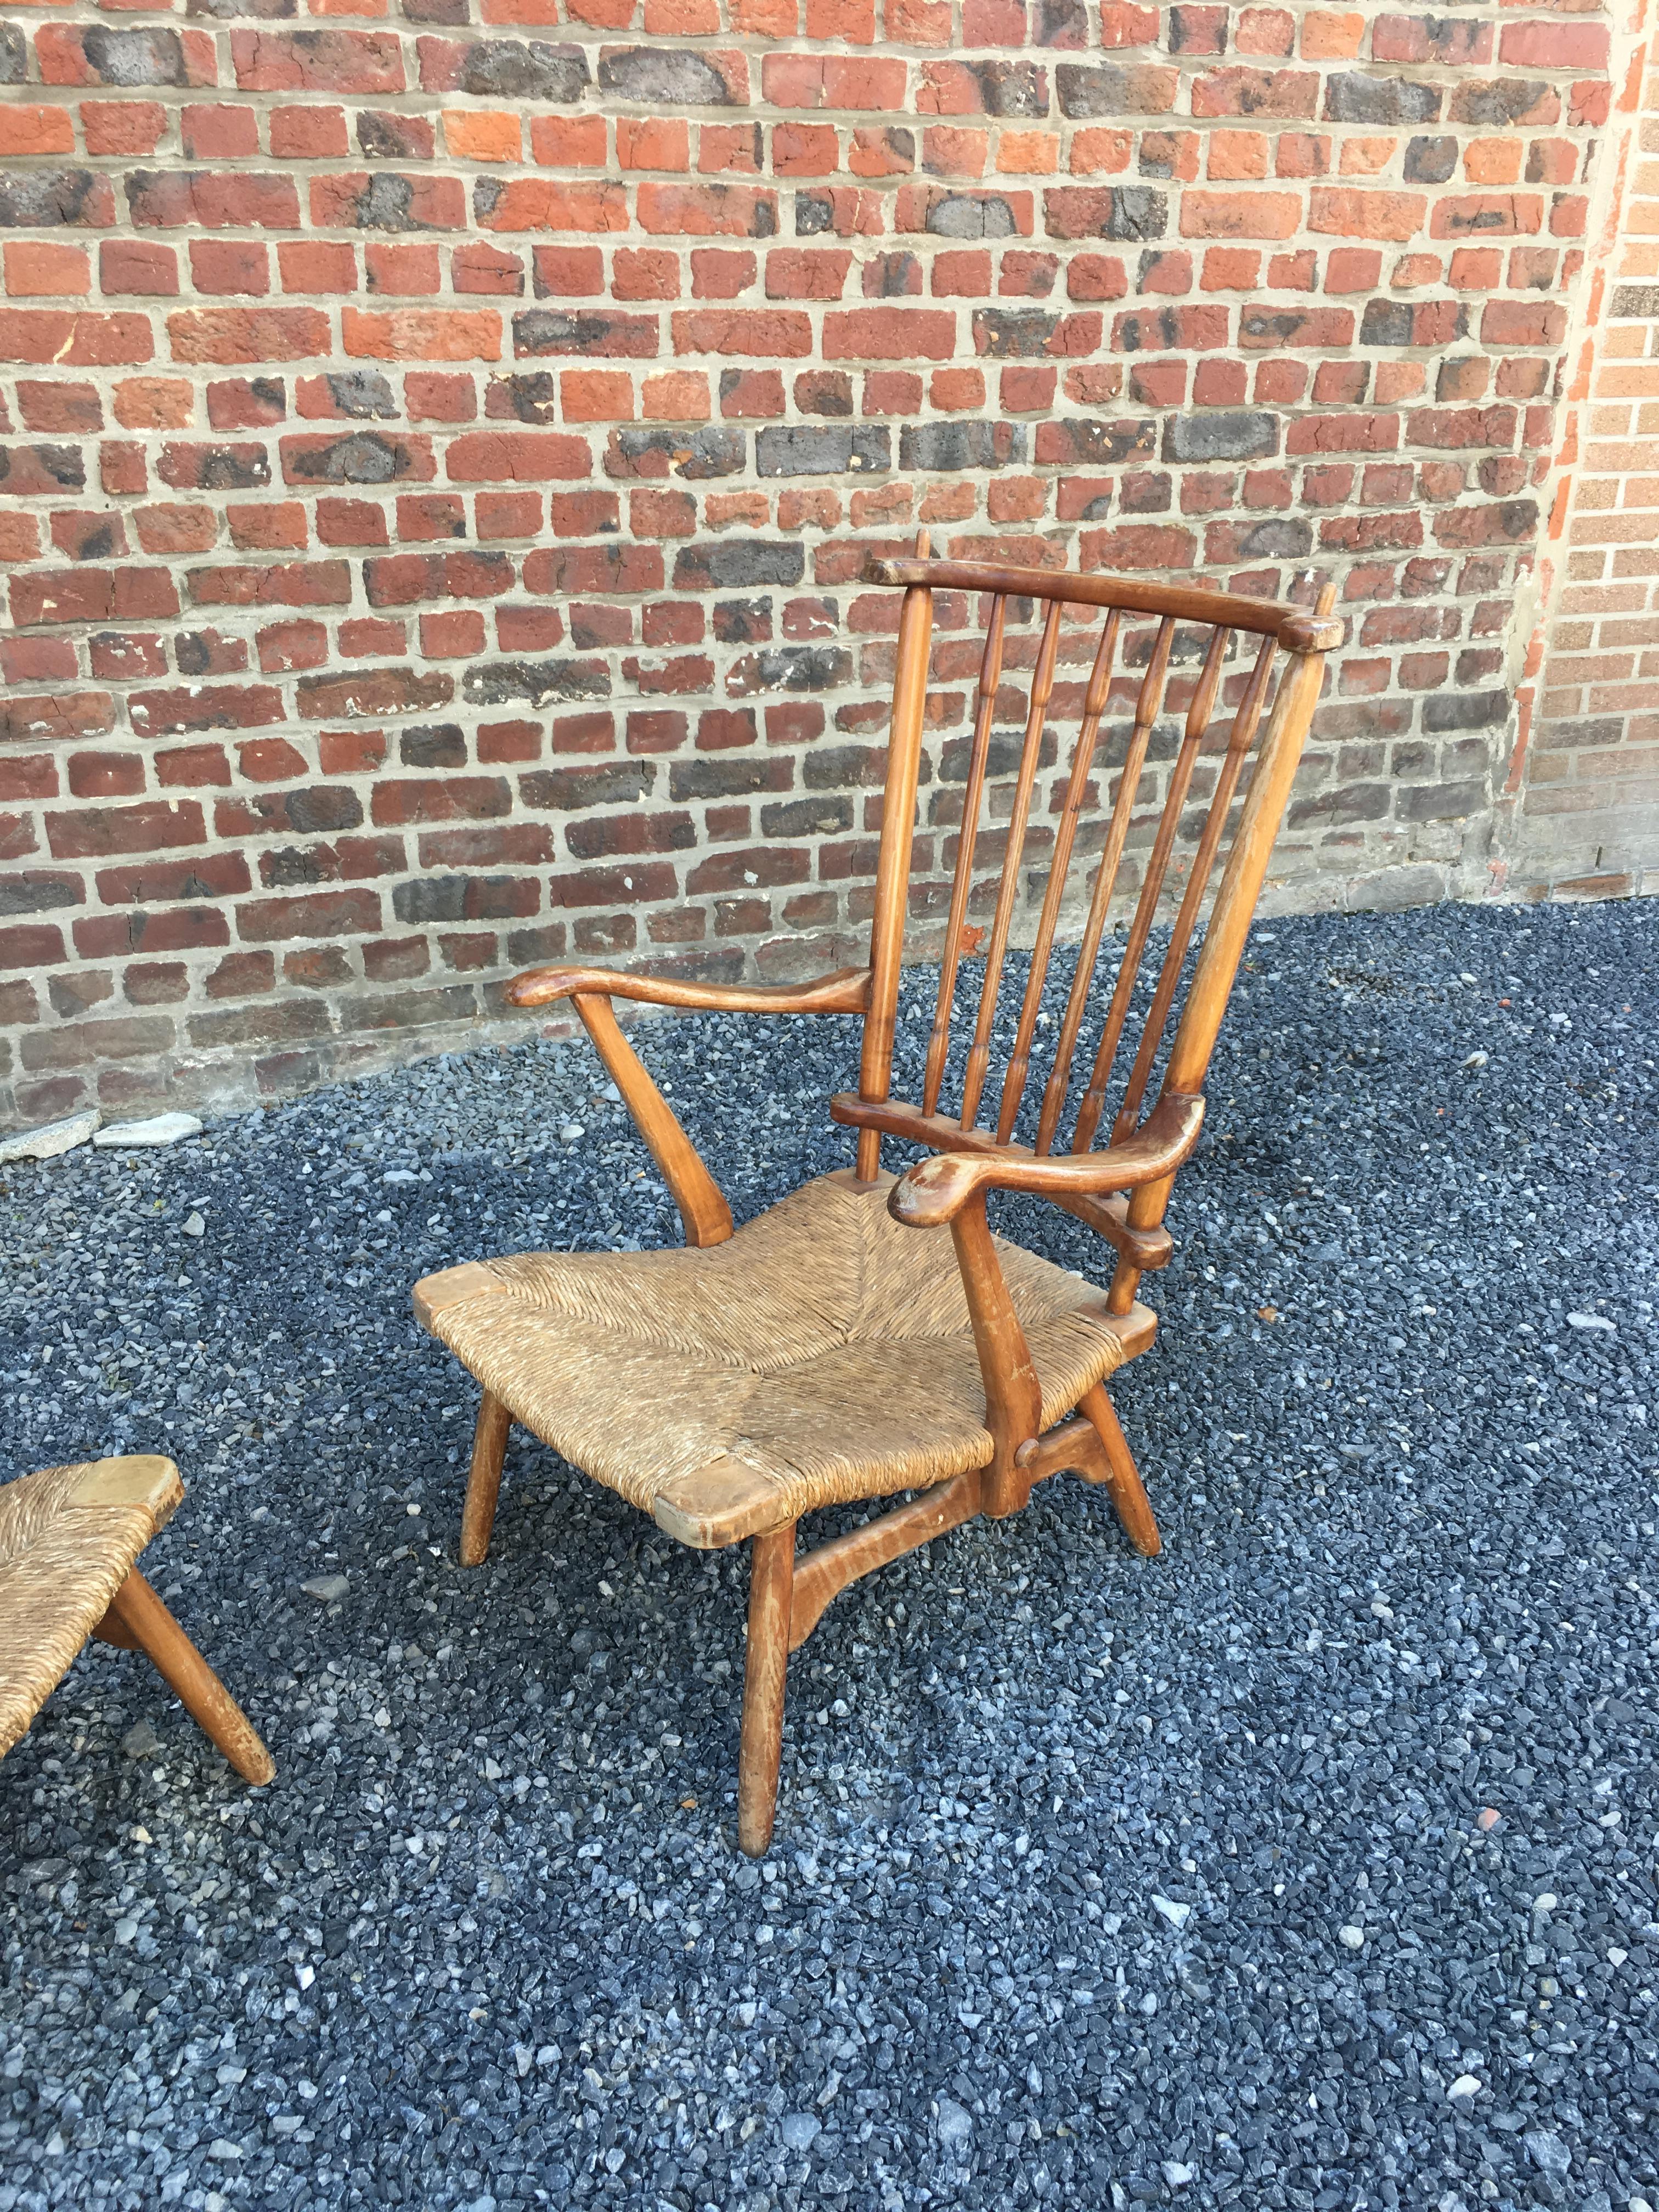 Paolo Buffa (attributed to) pair of cherrywood and straw Italian armchairs, circa 1950.
straw in good condition, but varnish in poor condition.